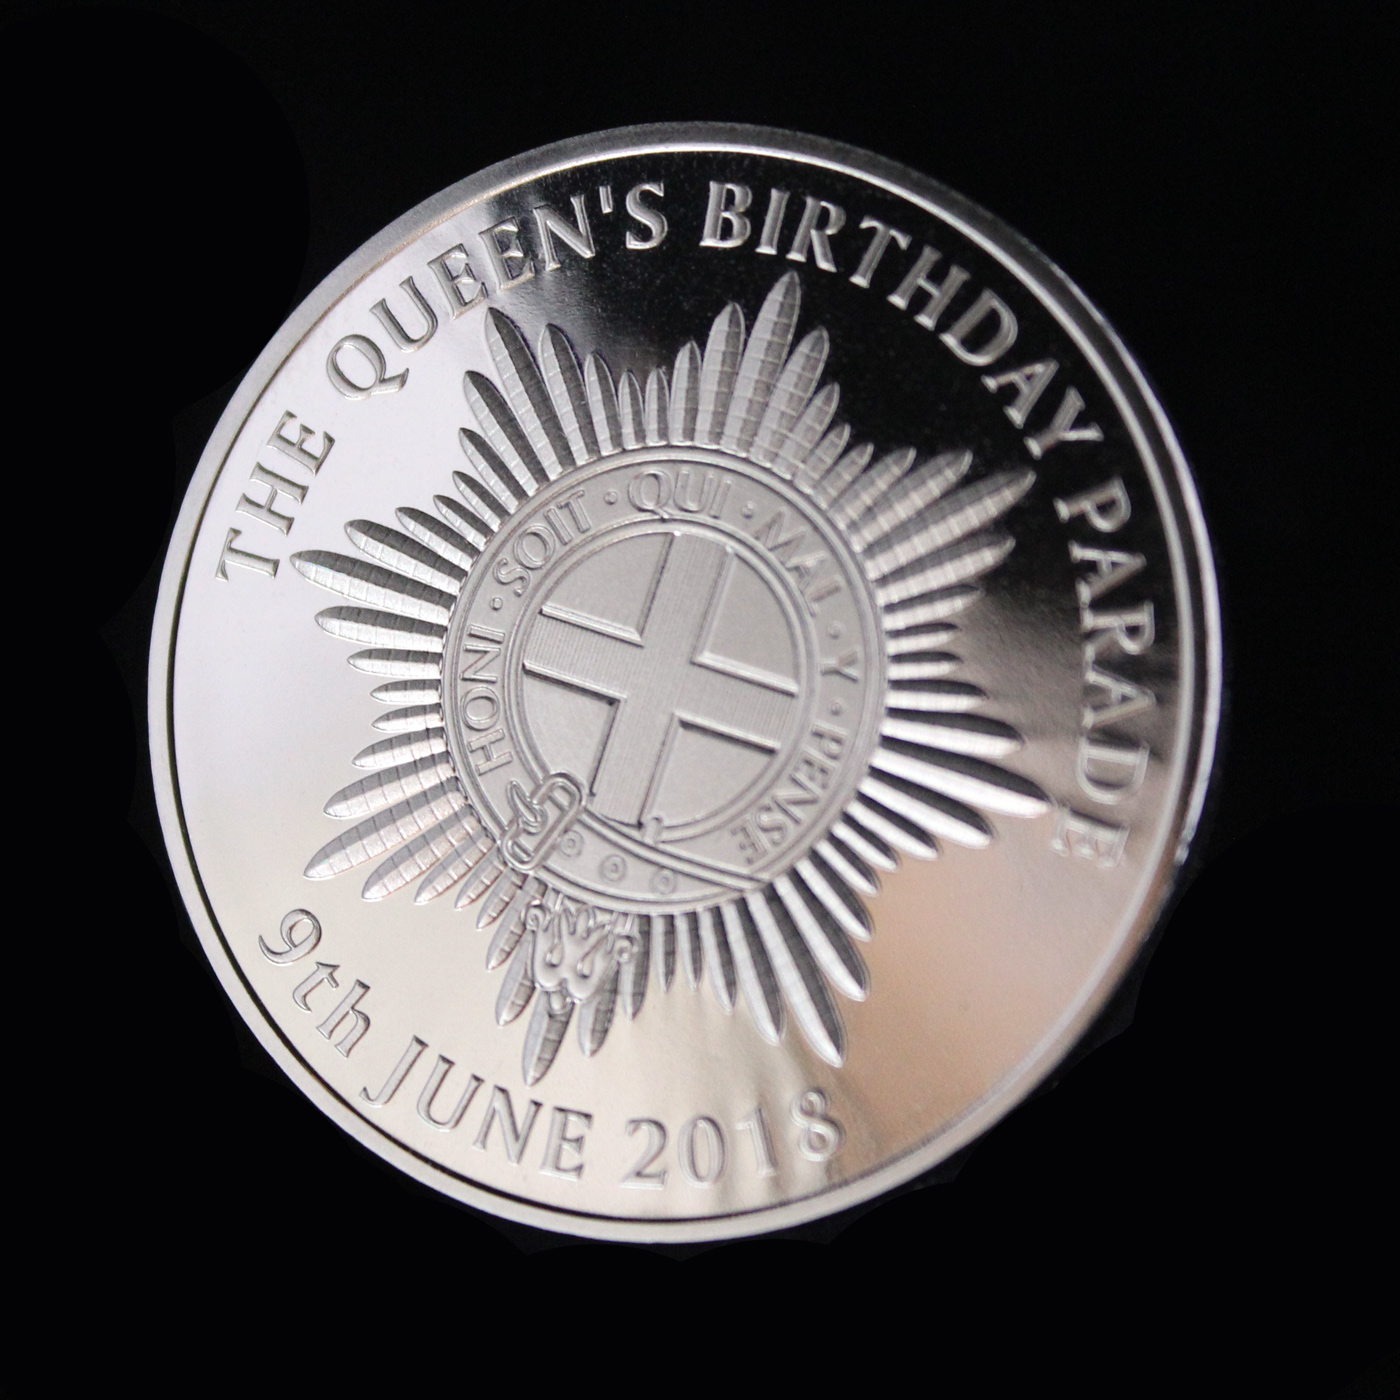 Close up of the Queens Birthday Parade Commemorative Coin